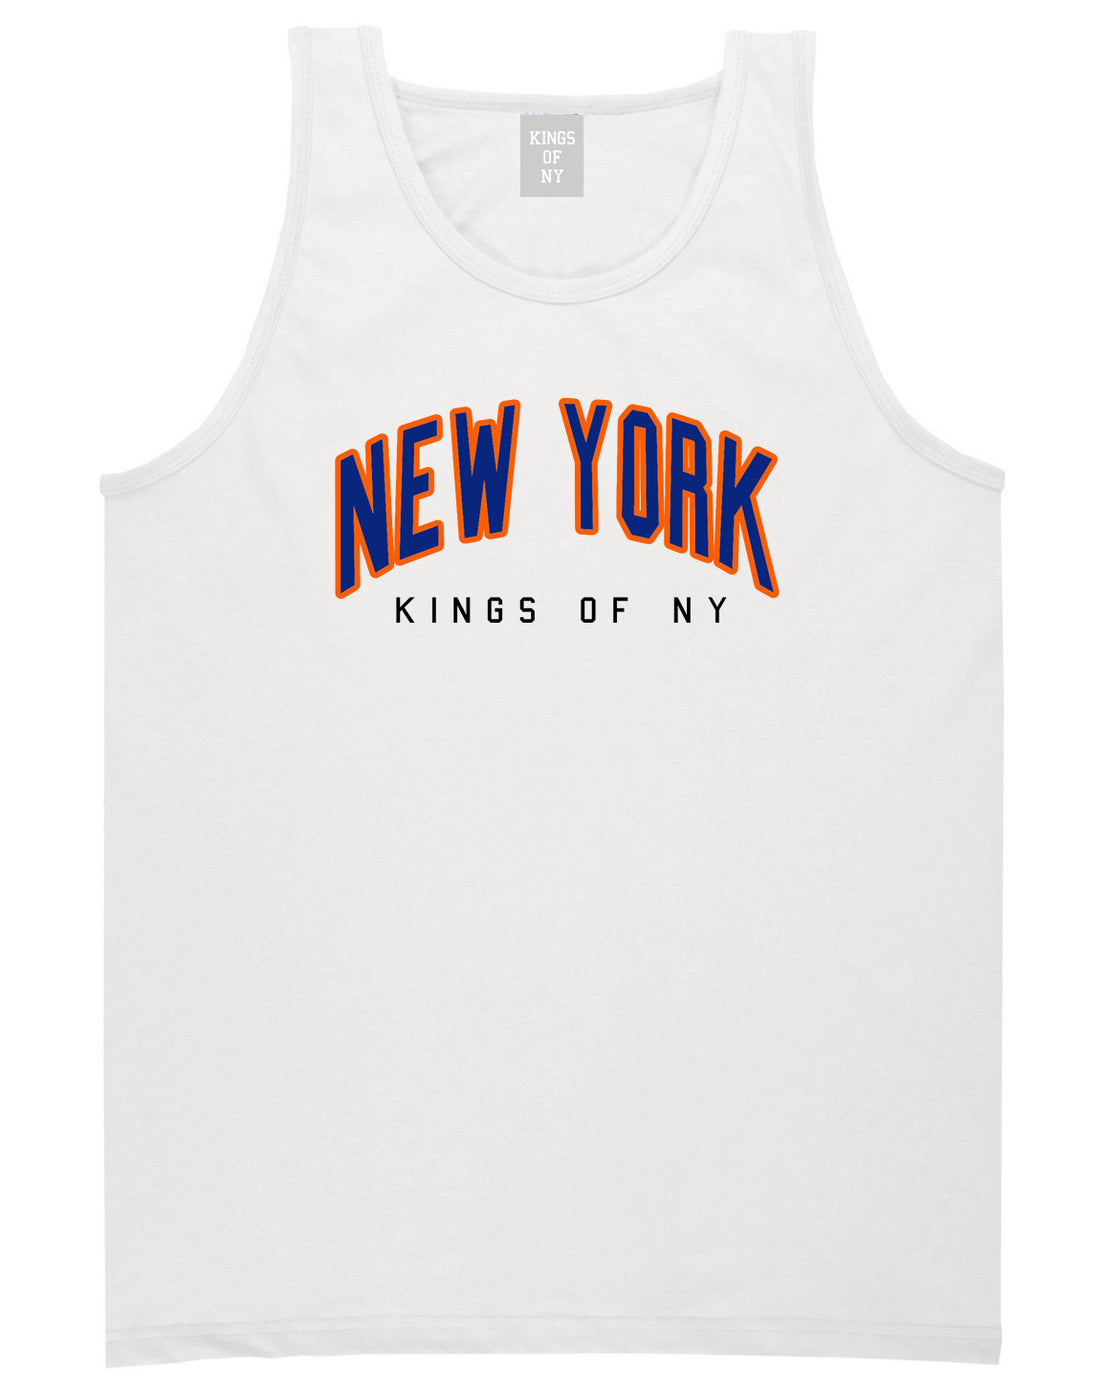 New York Blue And Orange Mens Tank Top Shirt White by Kings Of NY